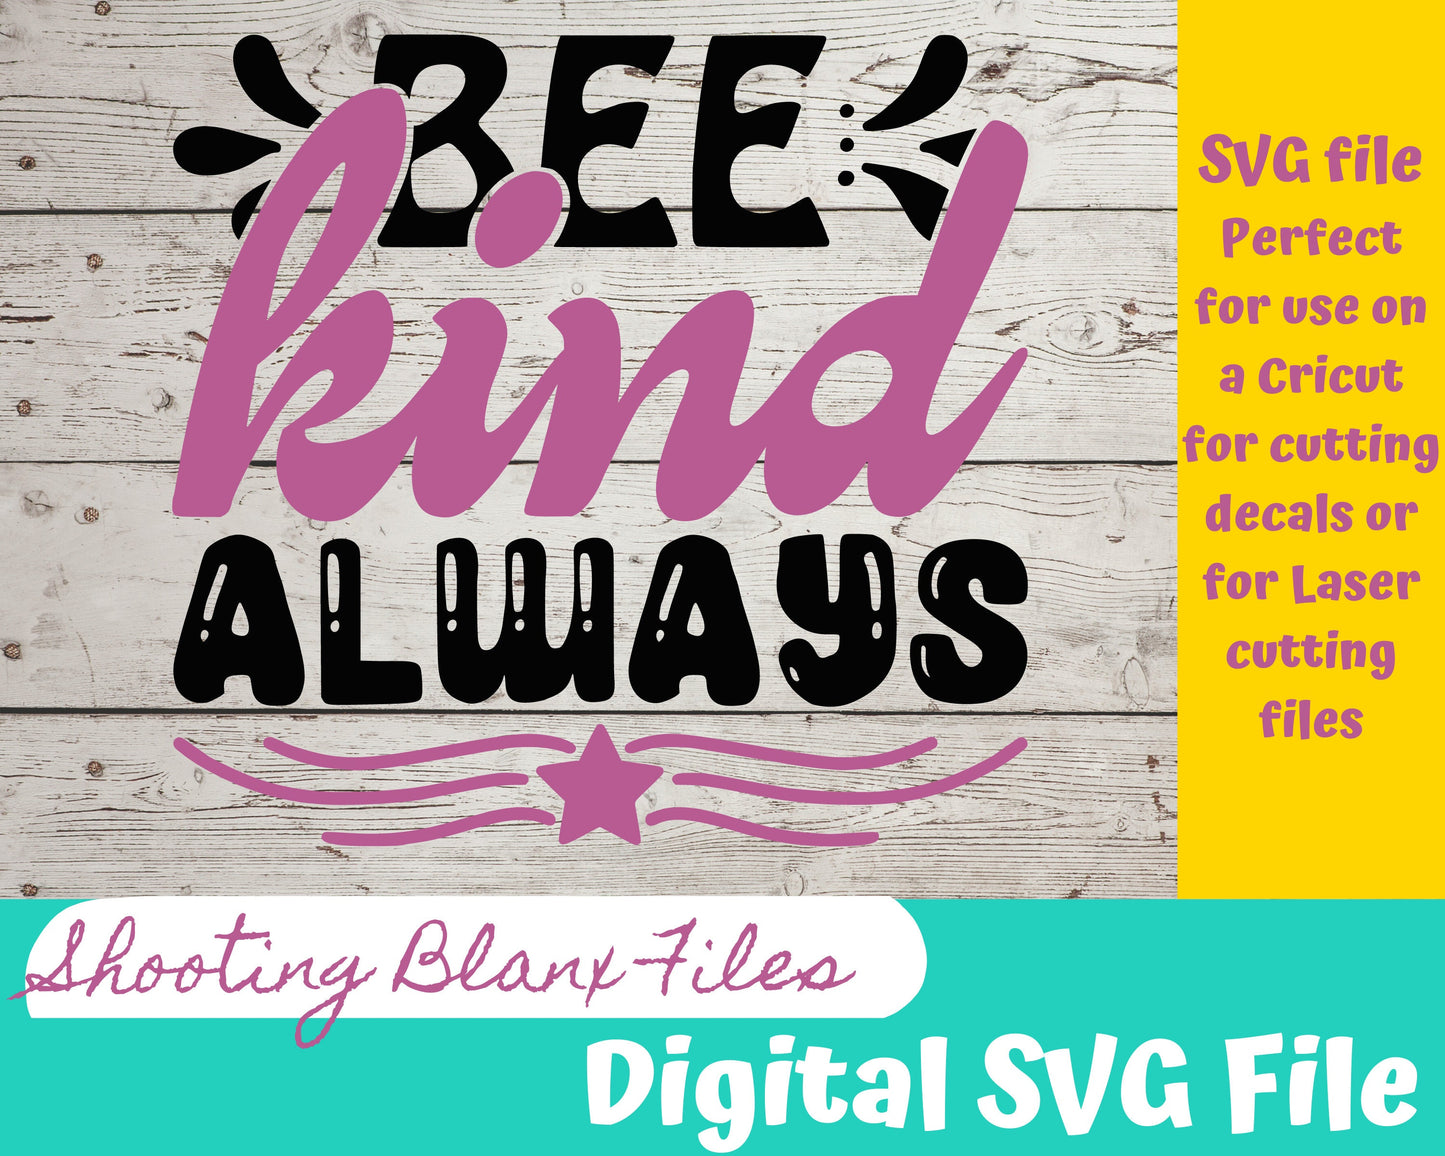 Bee Kind SVG file perfect for Cricut, Cameo, or Silhouette, laser engraving Glowforge, education, teachers week, school